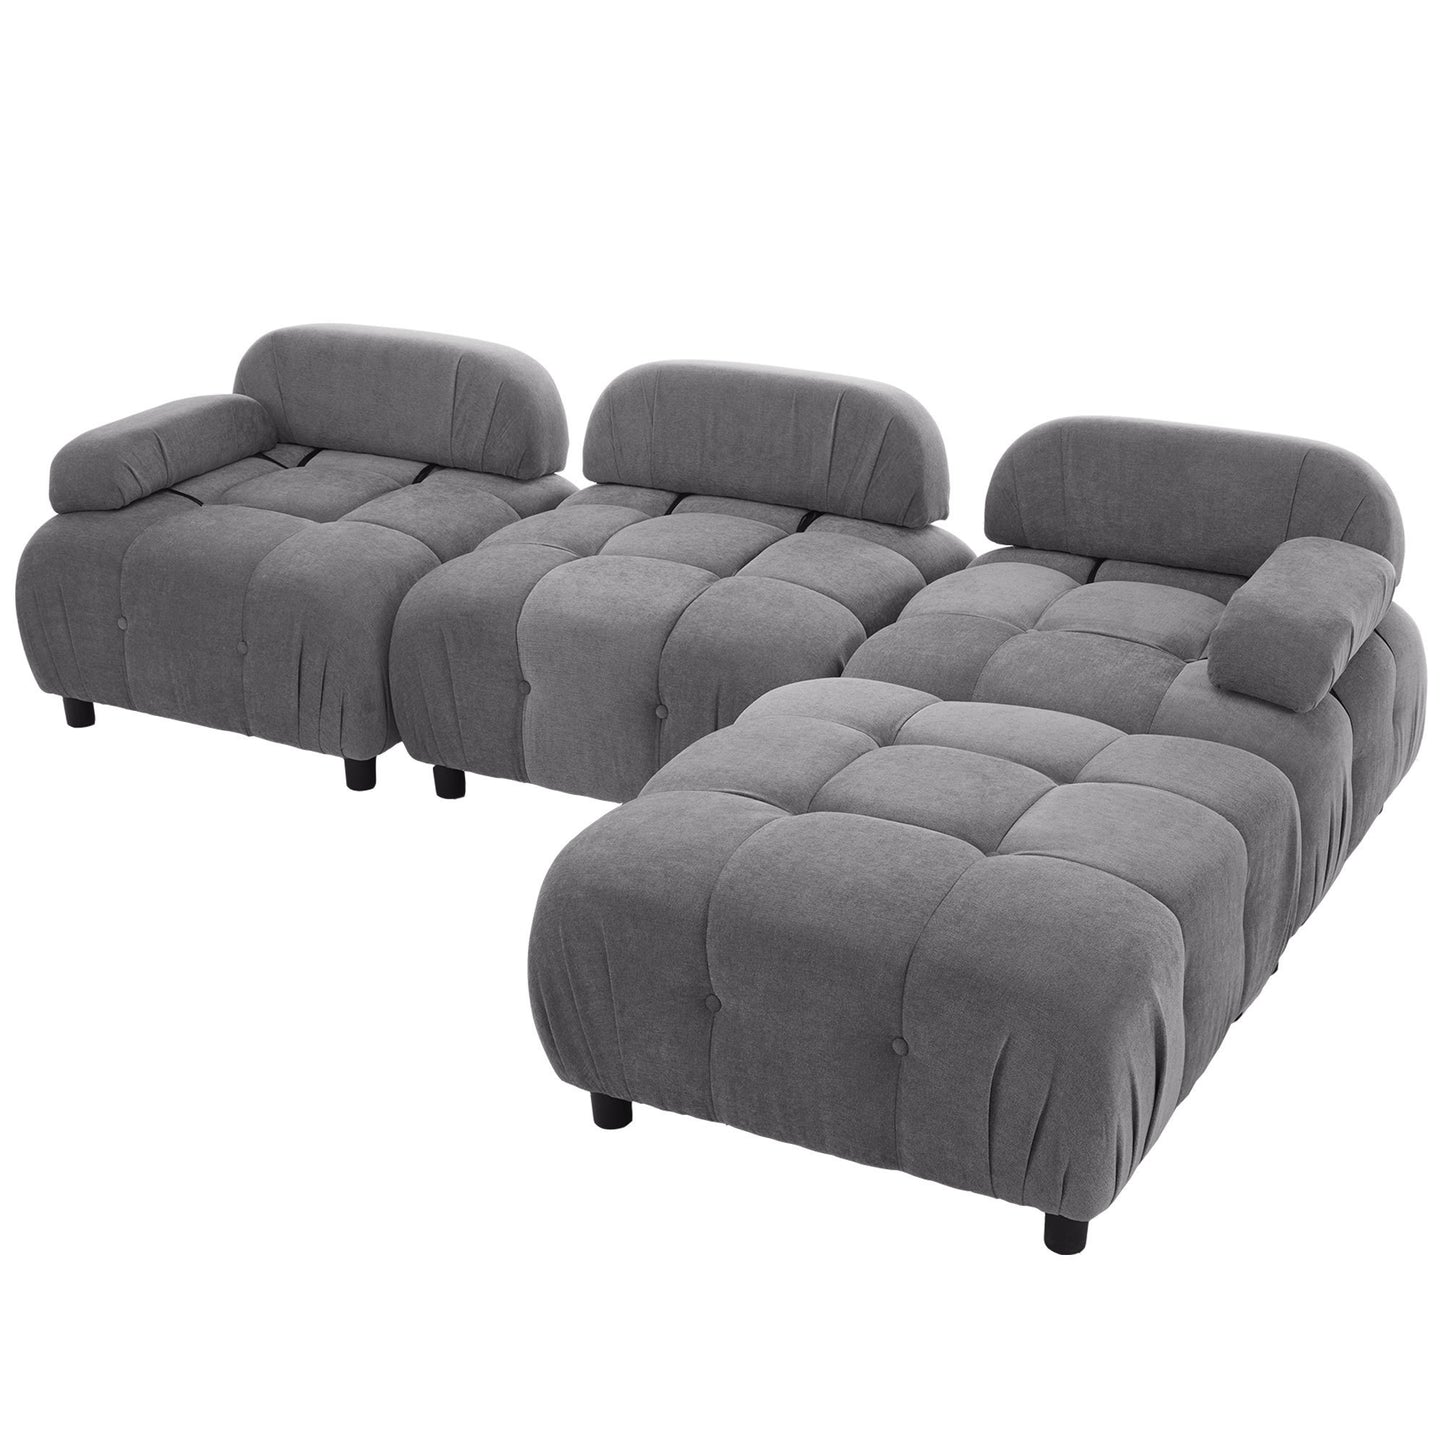 U_STYLE Upholstery Modular Convertible Sectional Sofa, L Shaped Couch with Reversible Chaise